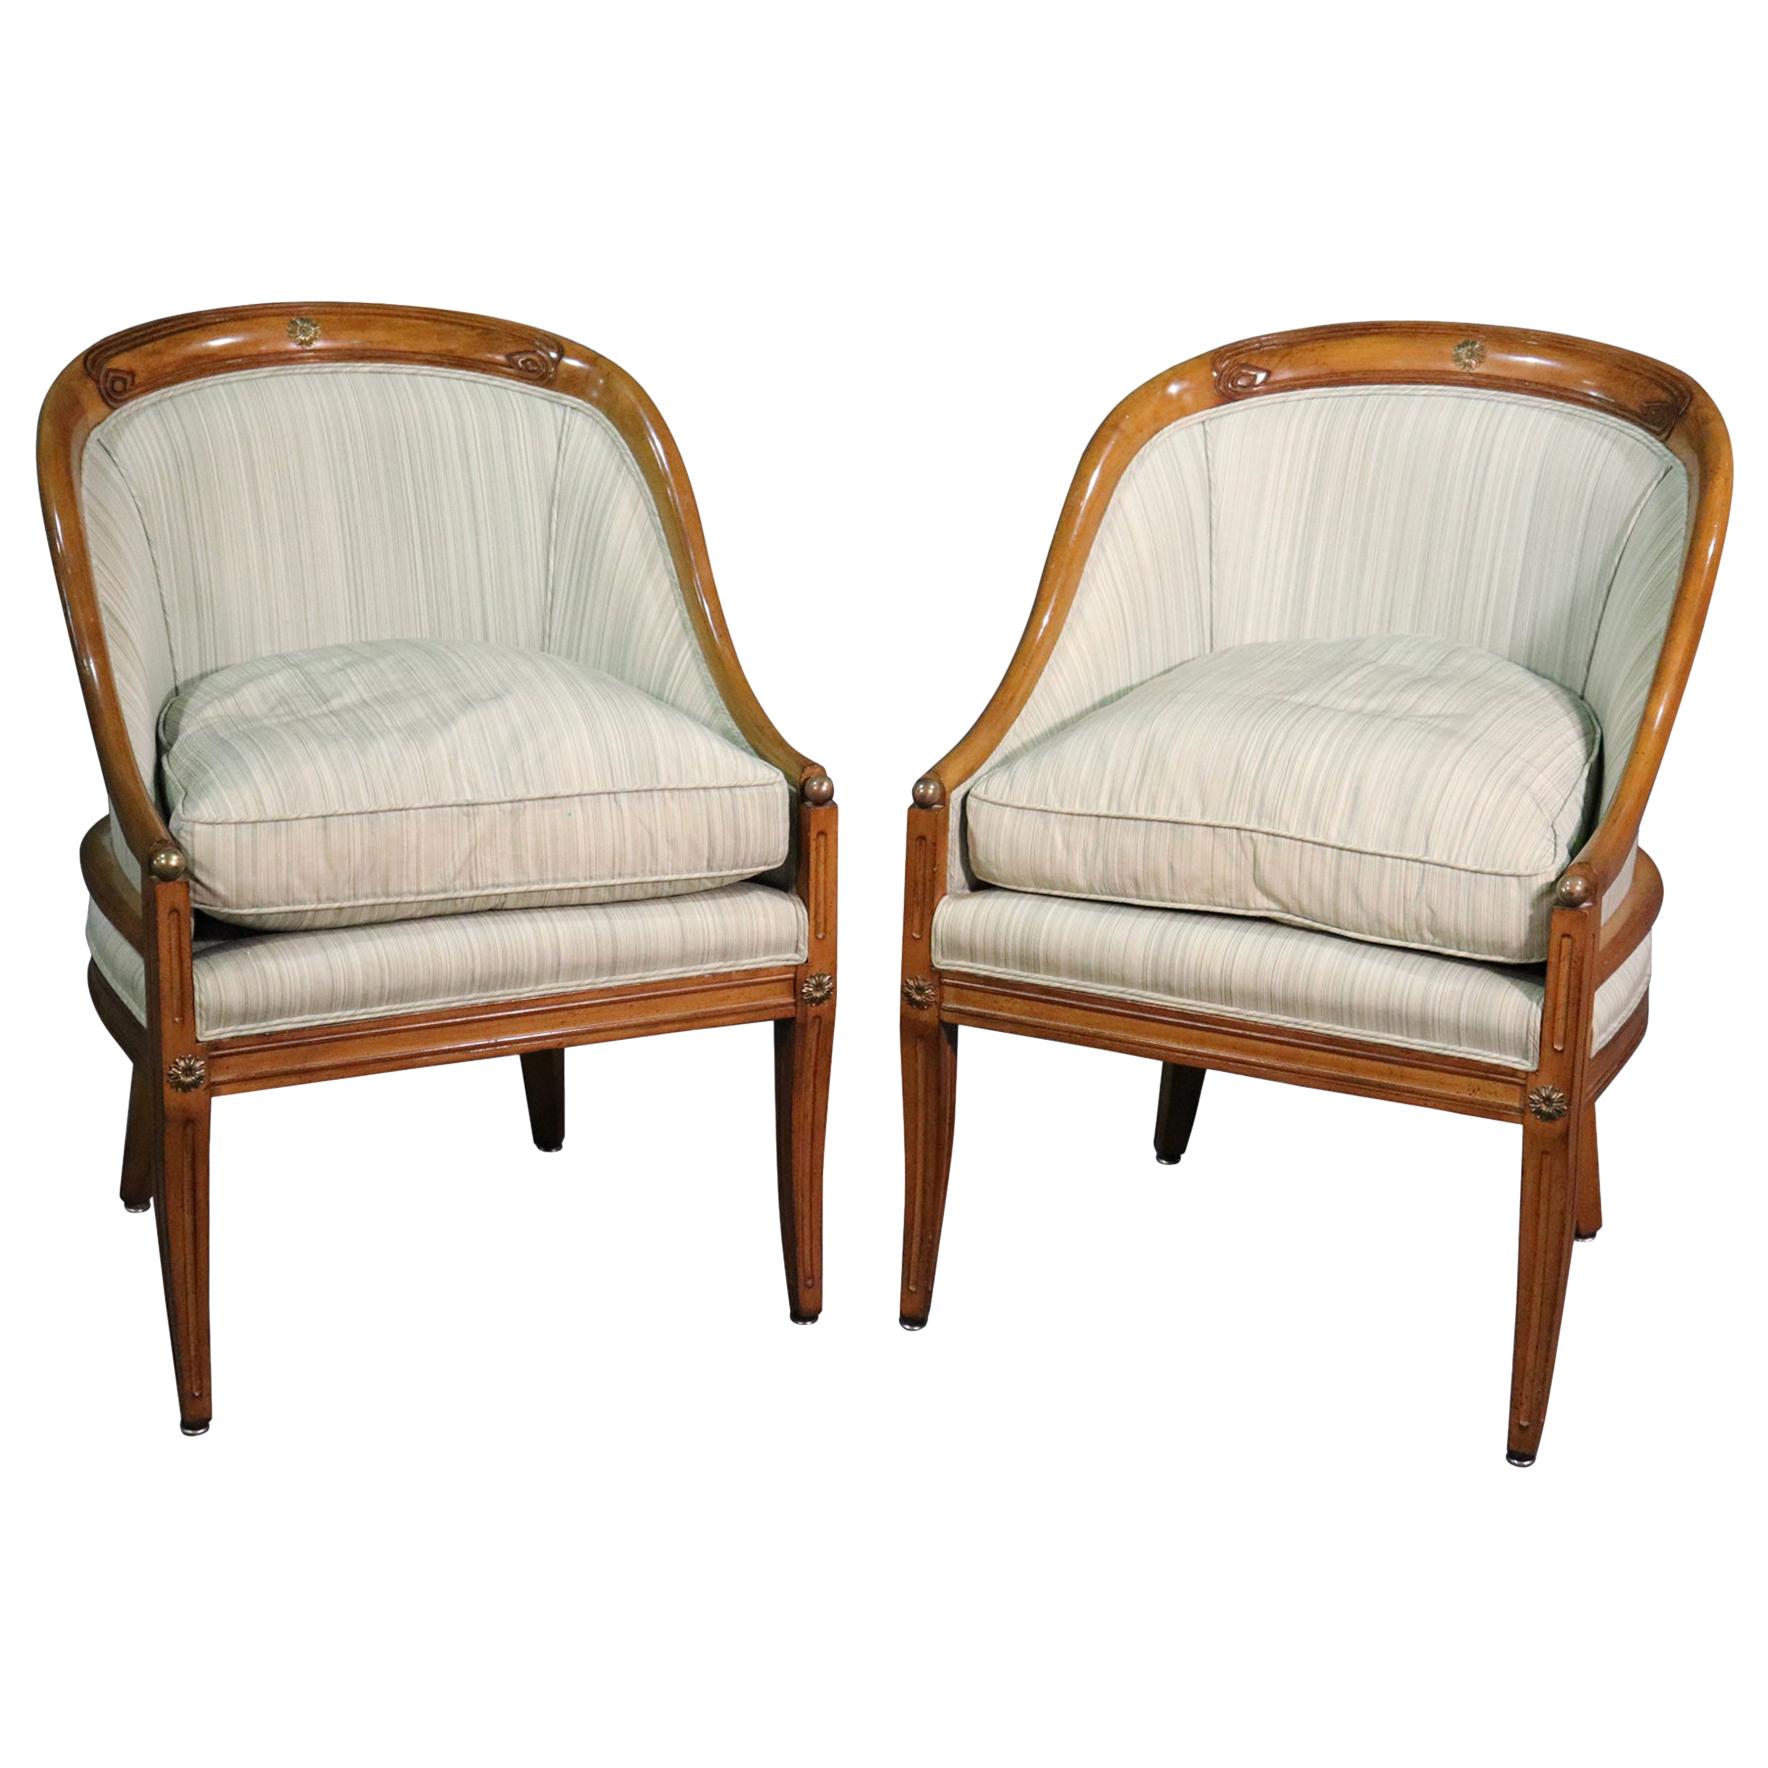 Pair of French Walnut Bronze Mounted Empire Bergère Lounge Chairs, circa 1940s